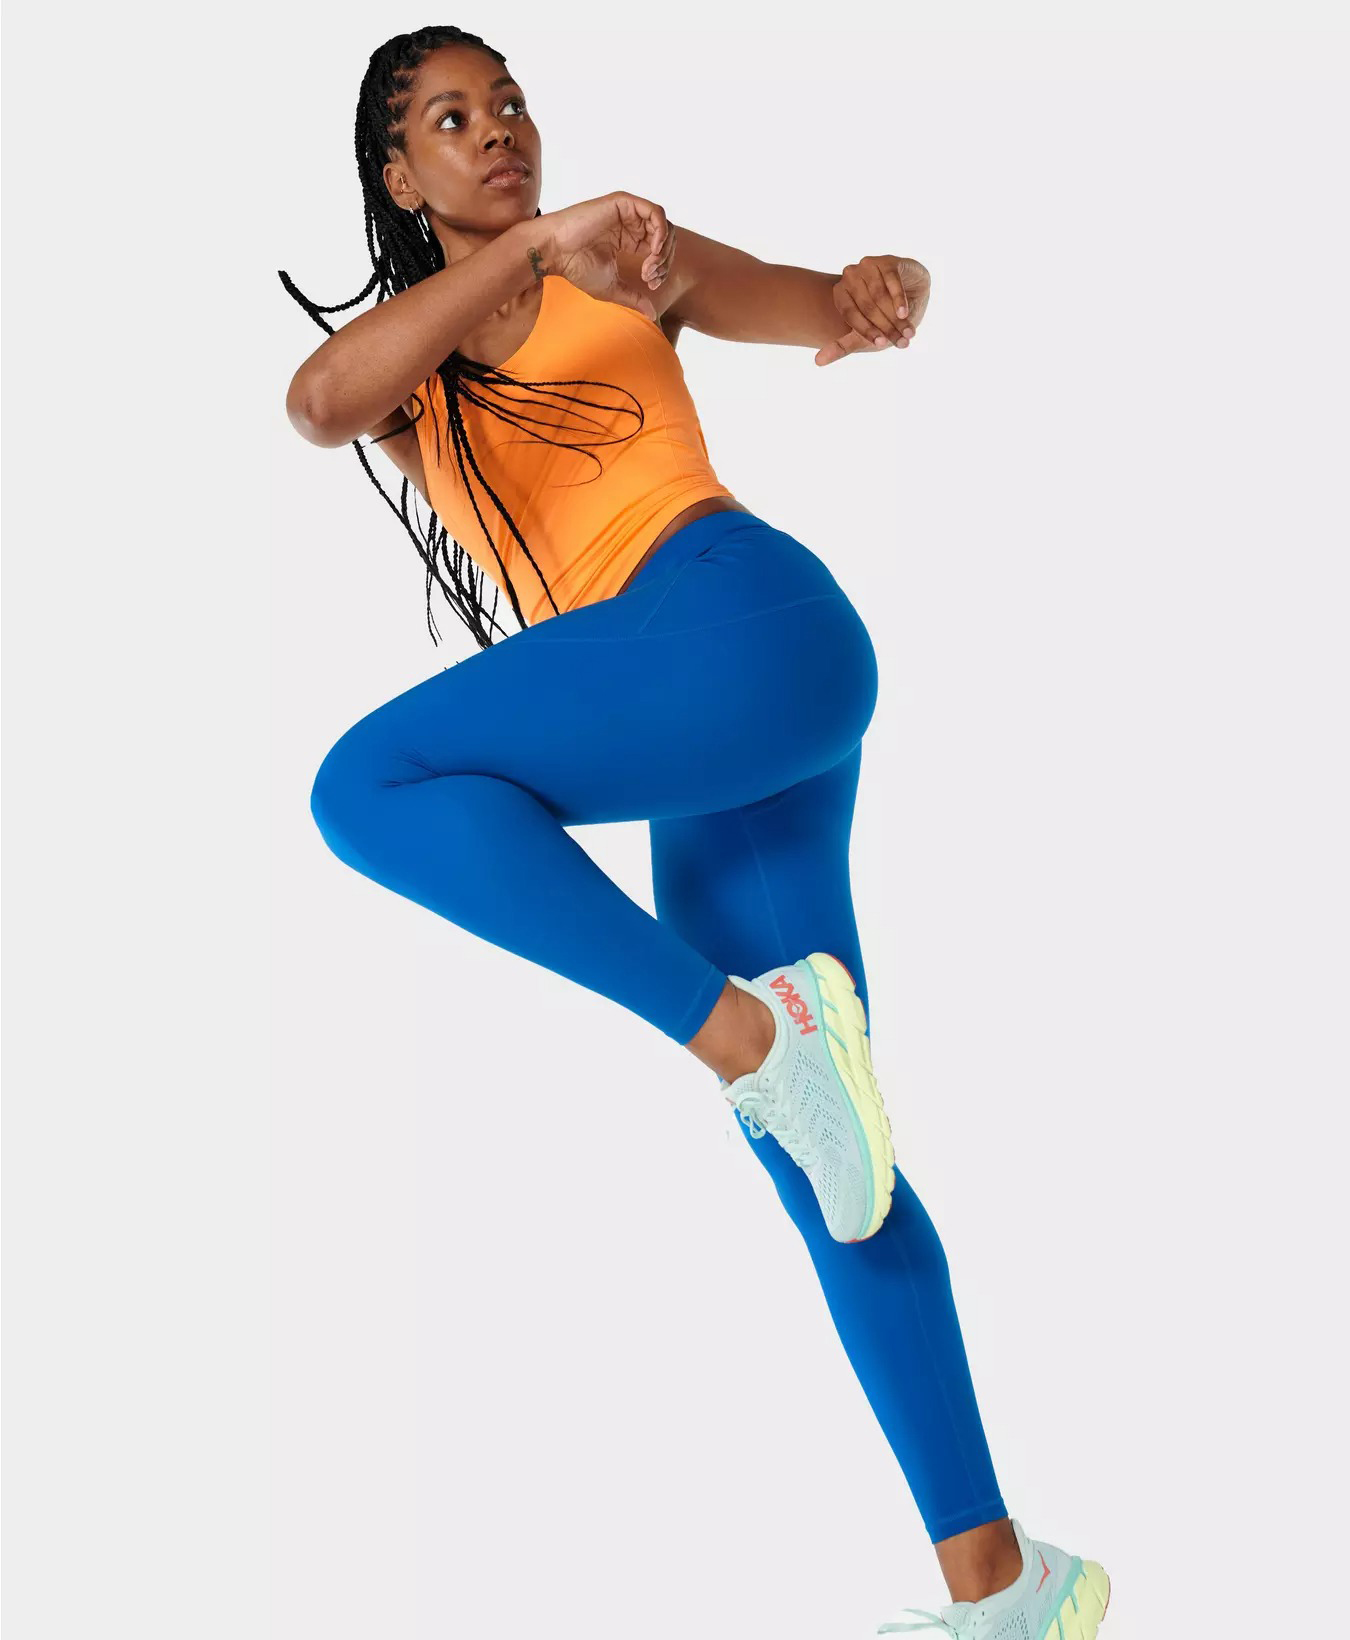 Maquinilla de afeitar Pautas diccionario 11 High-Waisted Leggings That Can Withstand Any Workout | TheThirty